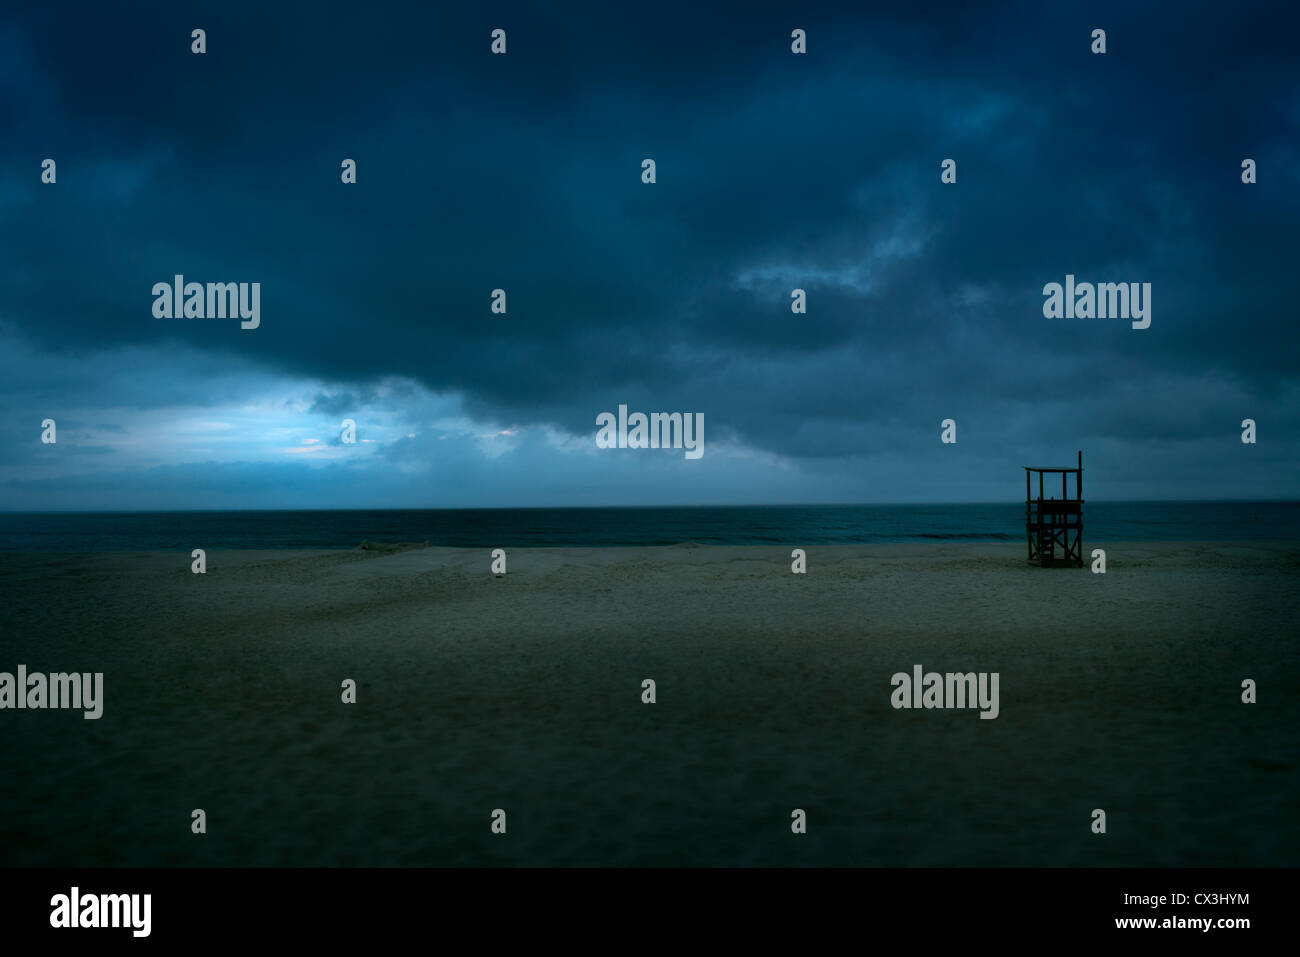 Lifeguard stand on an empty beach as storm approaches. Stock Photo